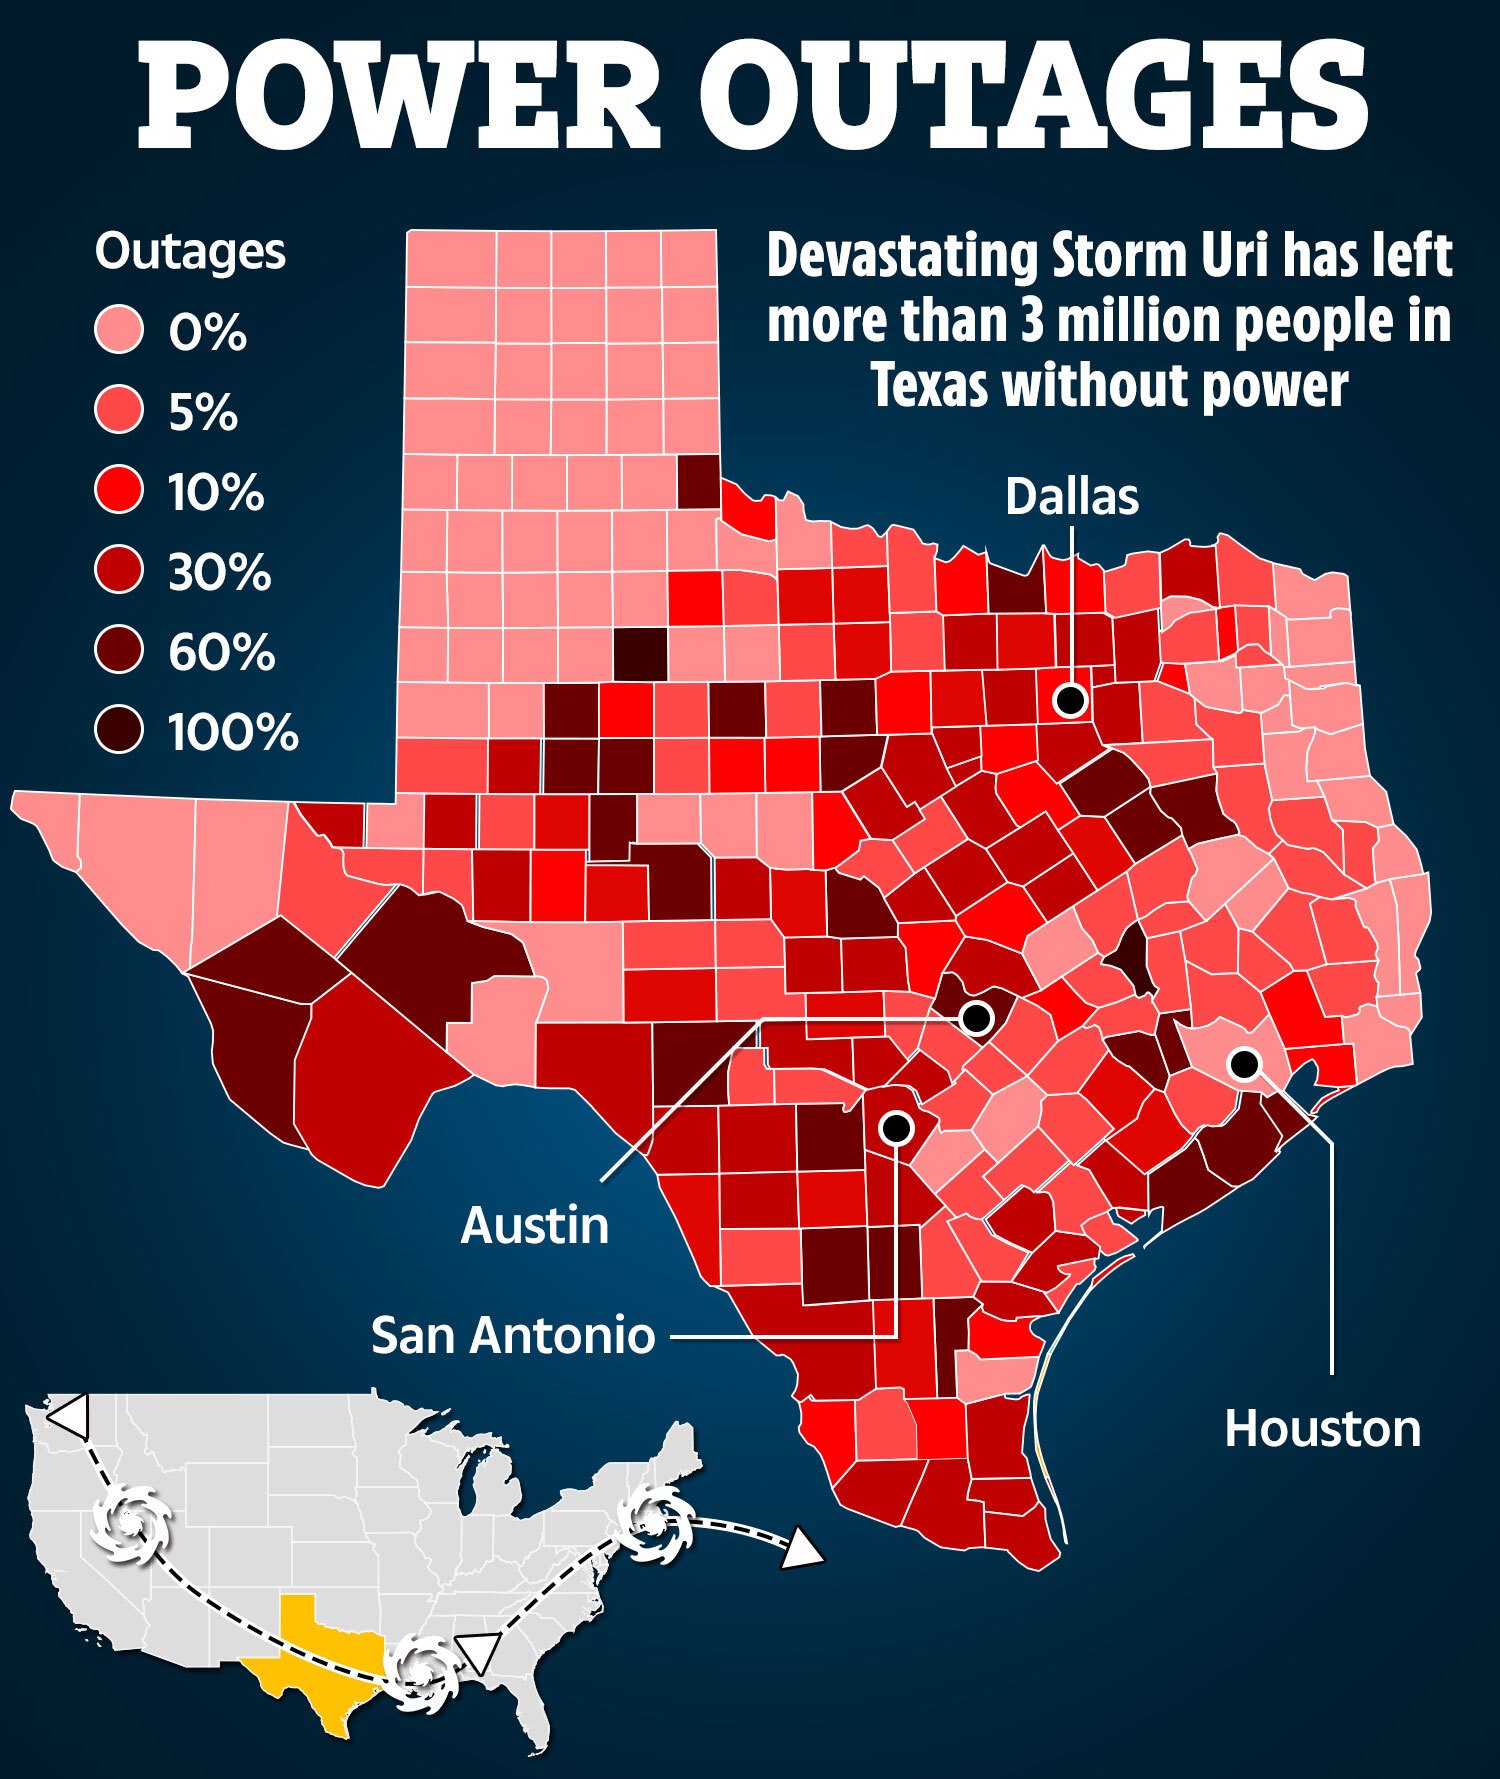 What Happened in Texas? February 2021 Power Outages